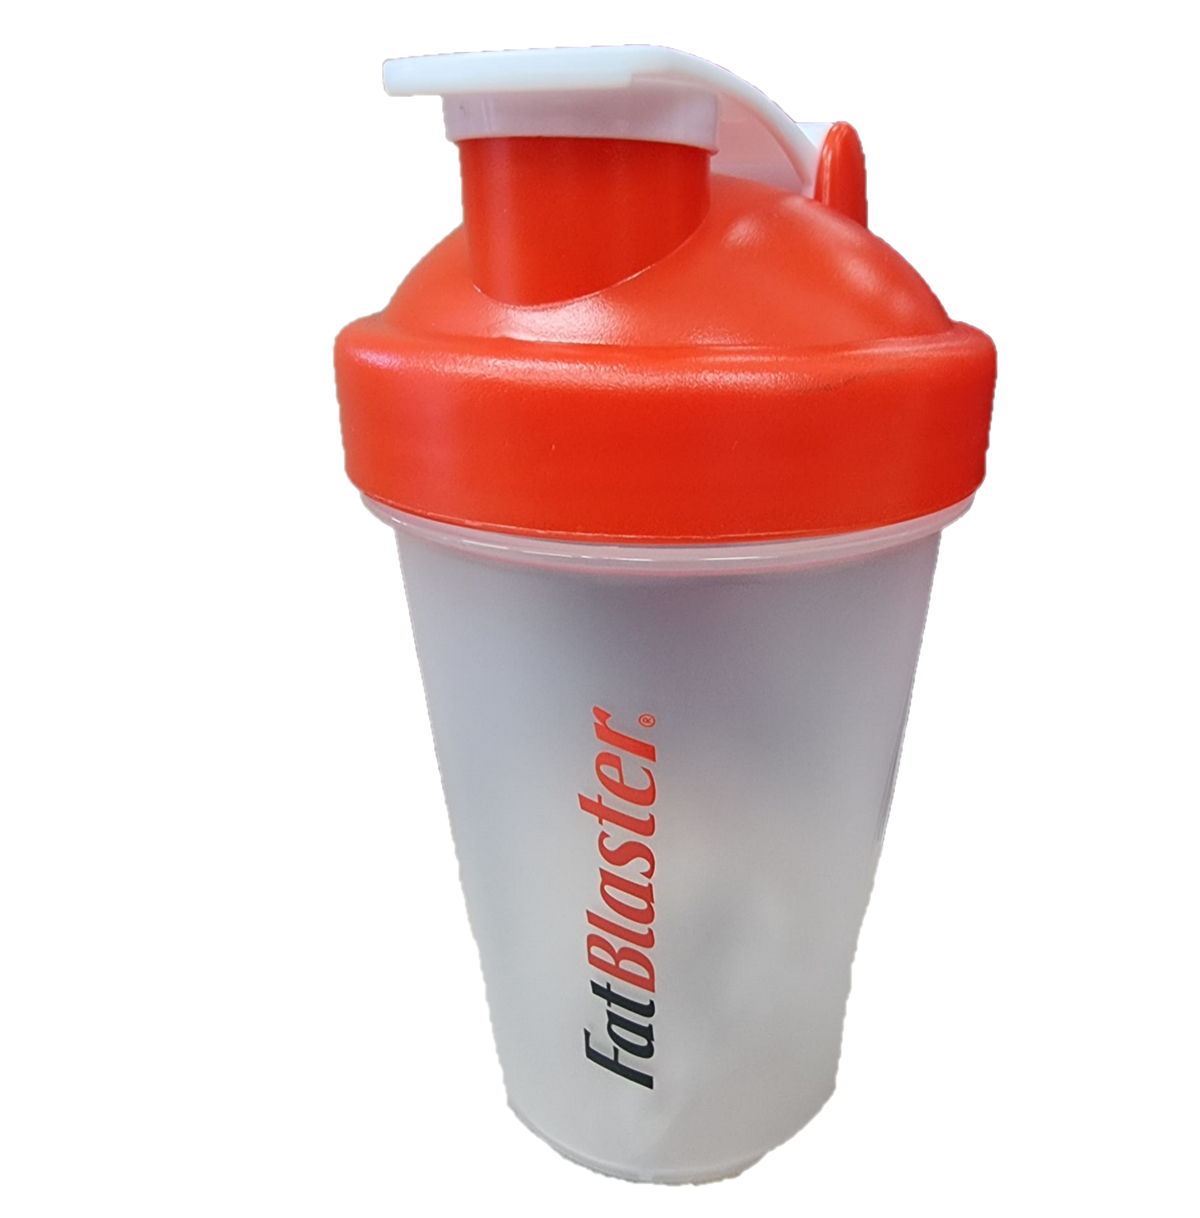 Naturopathica Fatblaster Shaker - GWP NOT FOR SALE